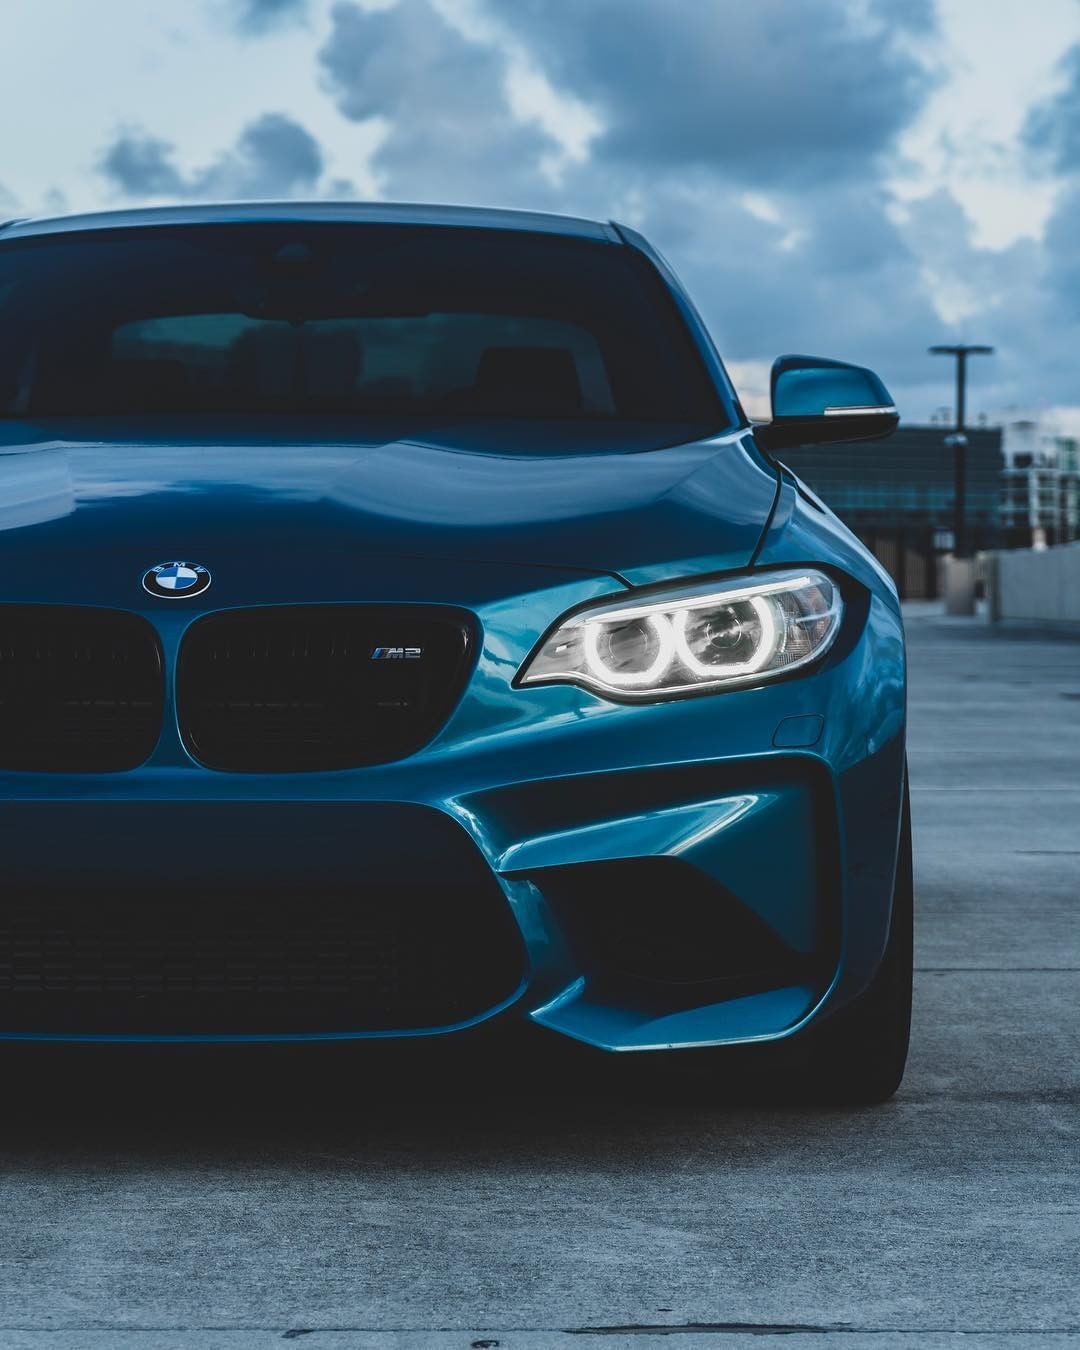 BMW M2 wallpaper for iPhone with high-resolution 1080x1920 pixel. You can use this wallpaper for your iPhone 5, 6, 7, 8, X, XS, XR backgrounds, Mobile Screensaver, or iPad Lock Screen - BMW